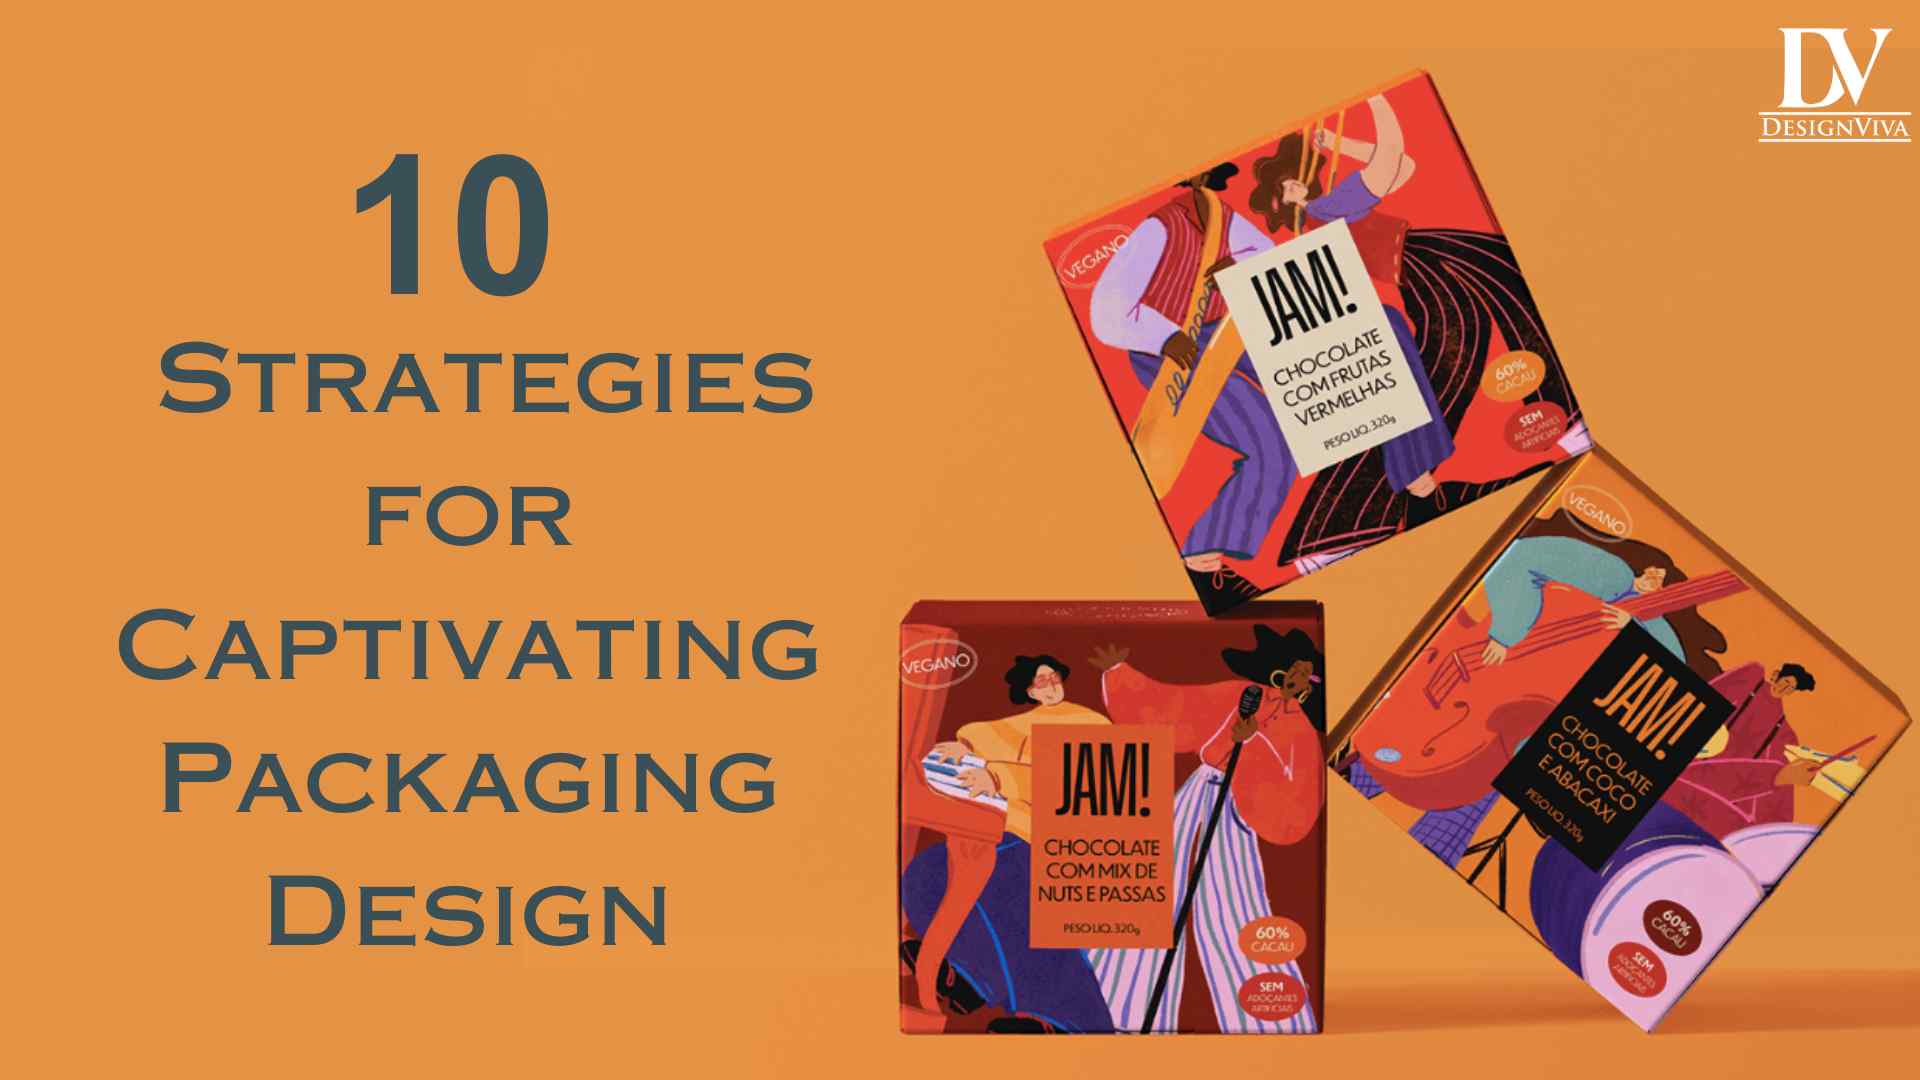 10 Strategies for Captivating Packaging Design